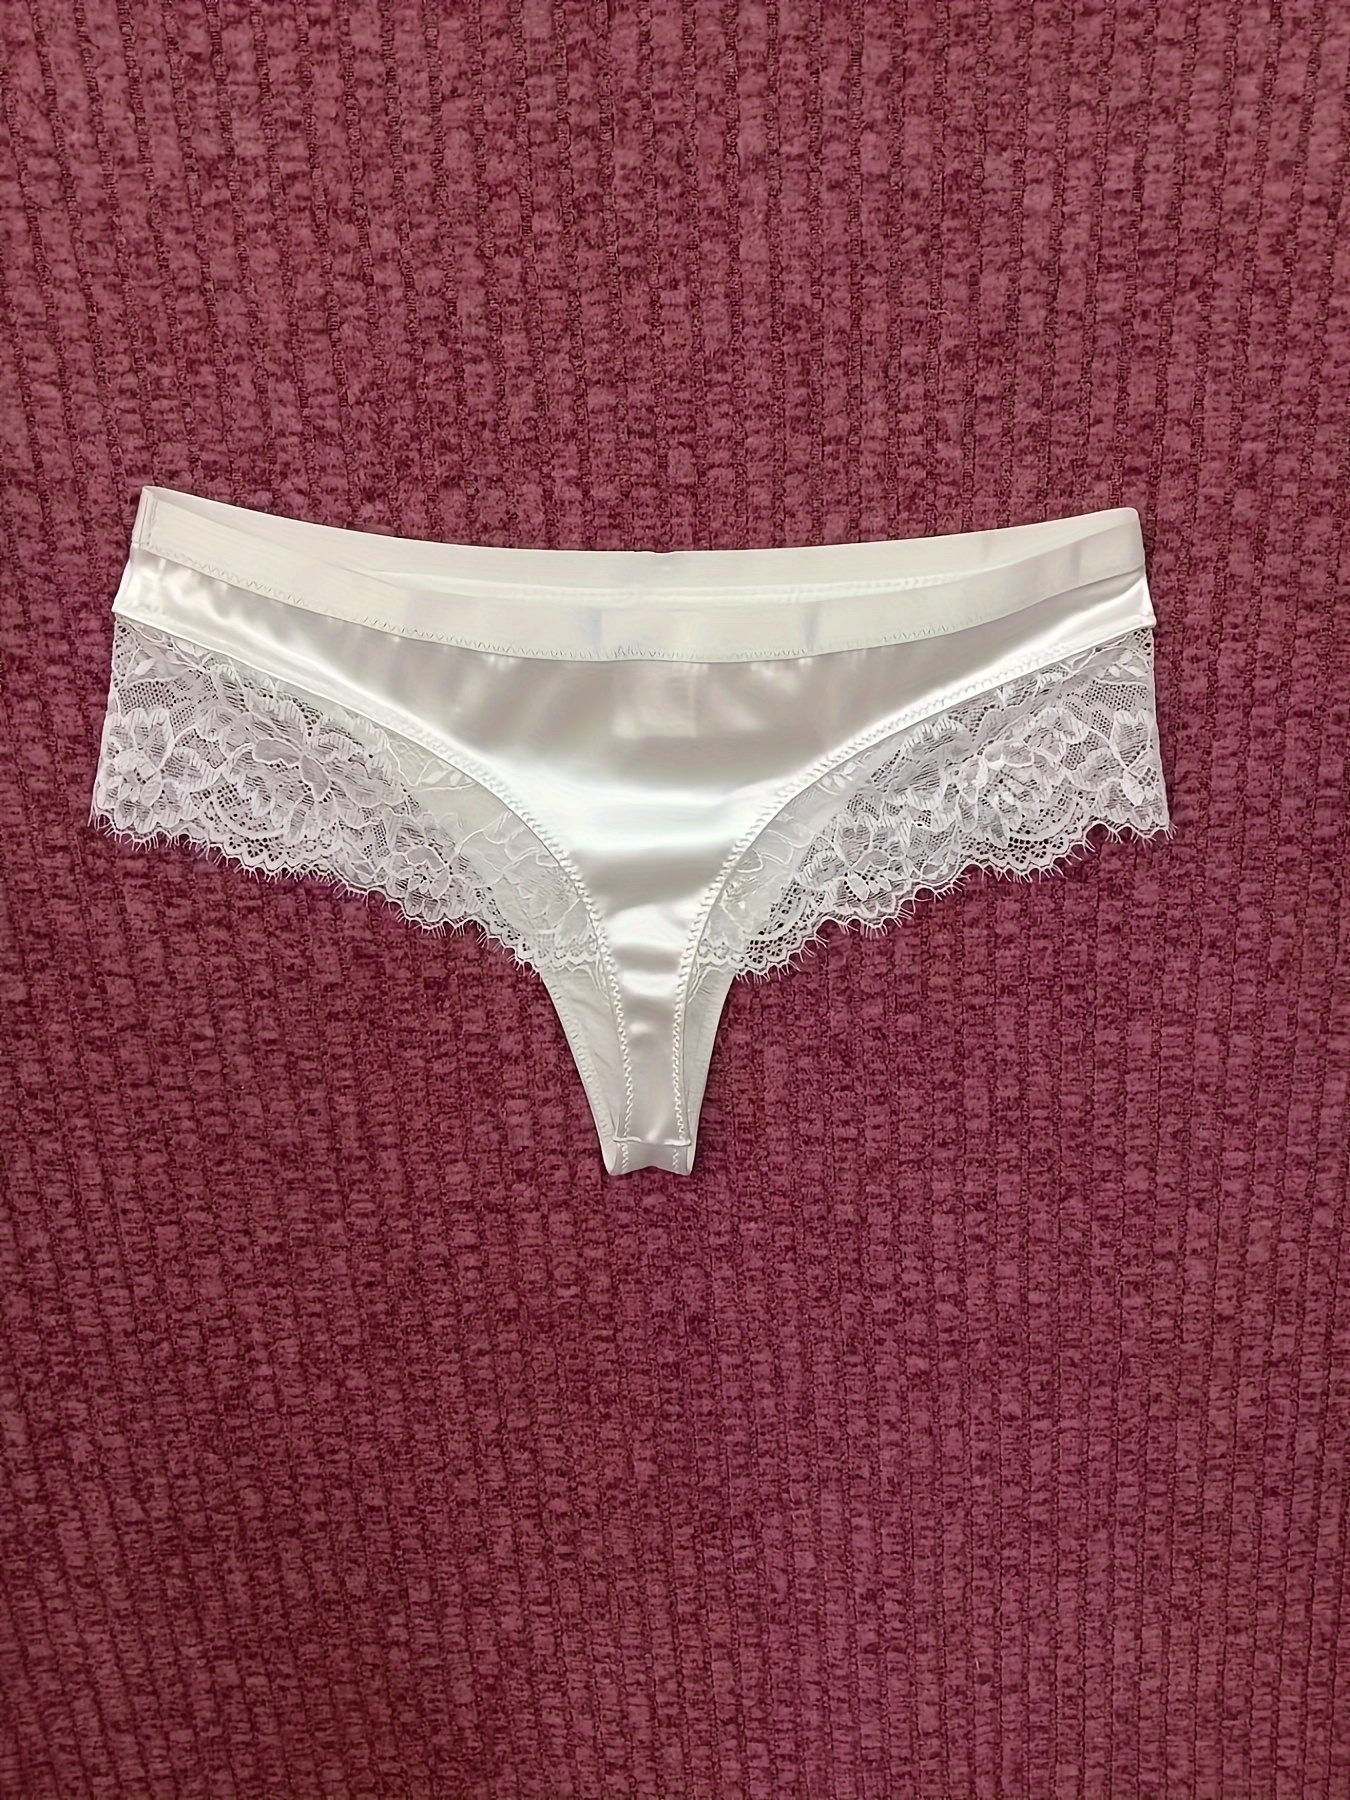 Seductive Lace Thong For Valentine's Day - Low Waisted G-String Pantie With  Semi-Sheer Design For A Sexy Look